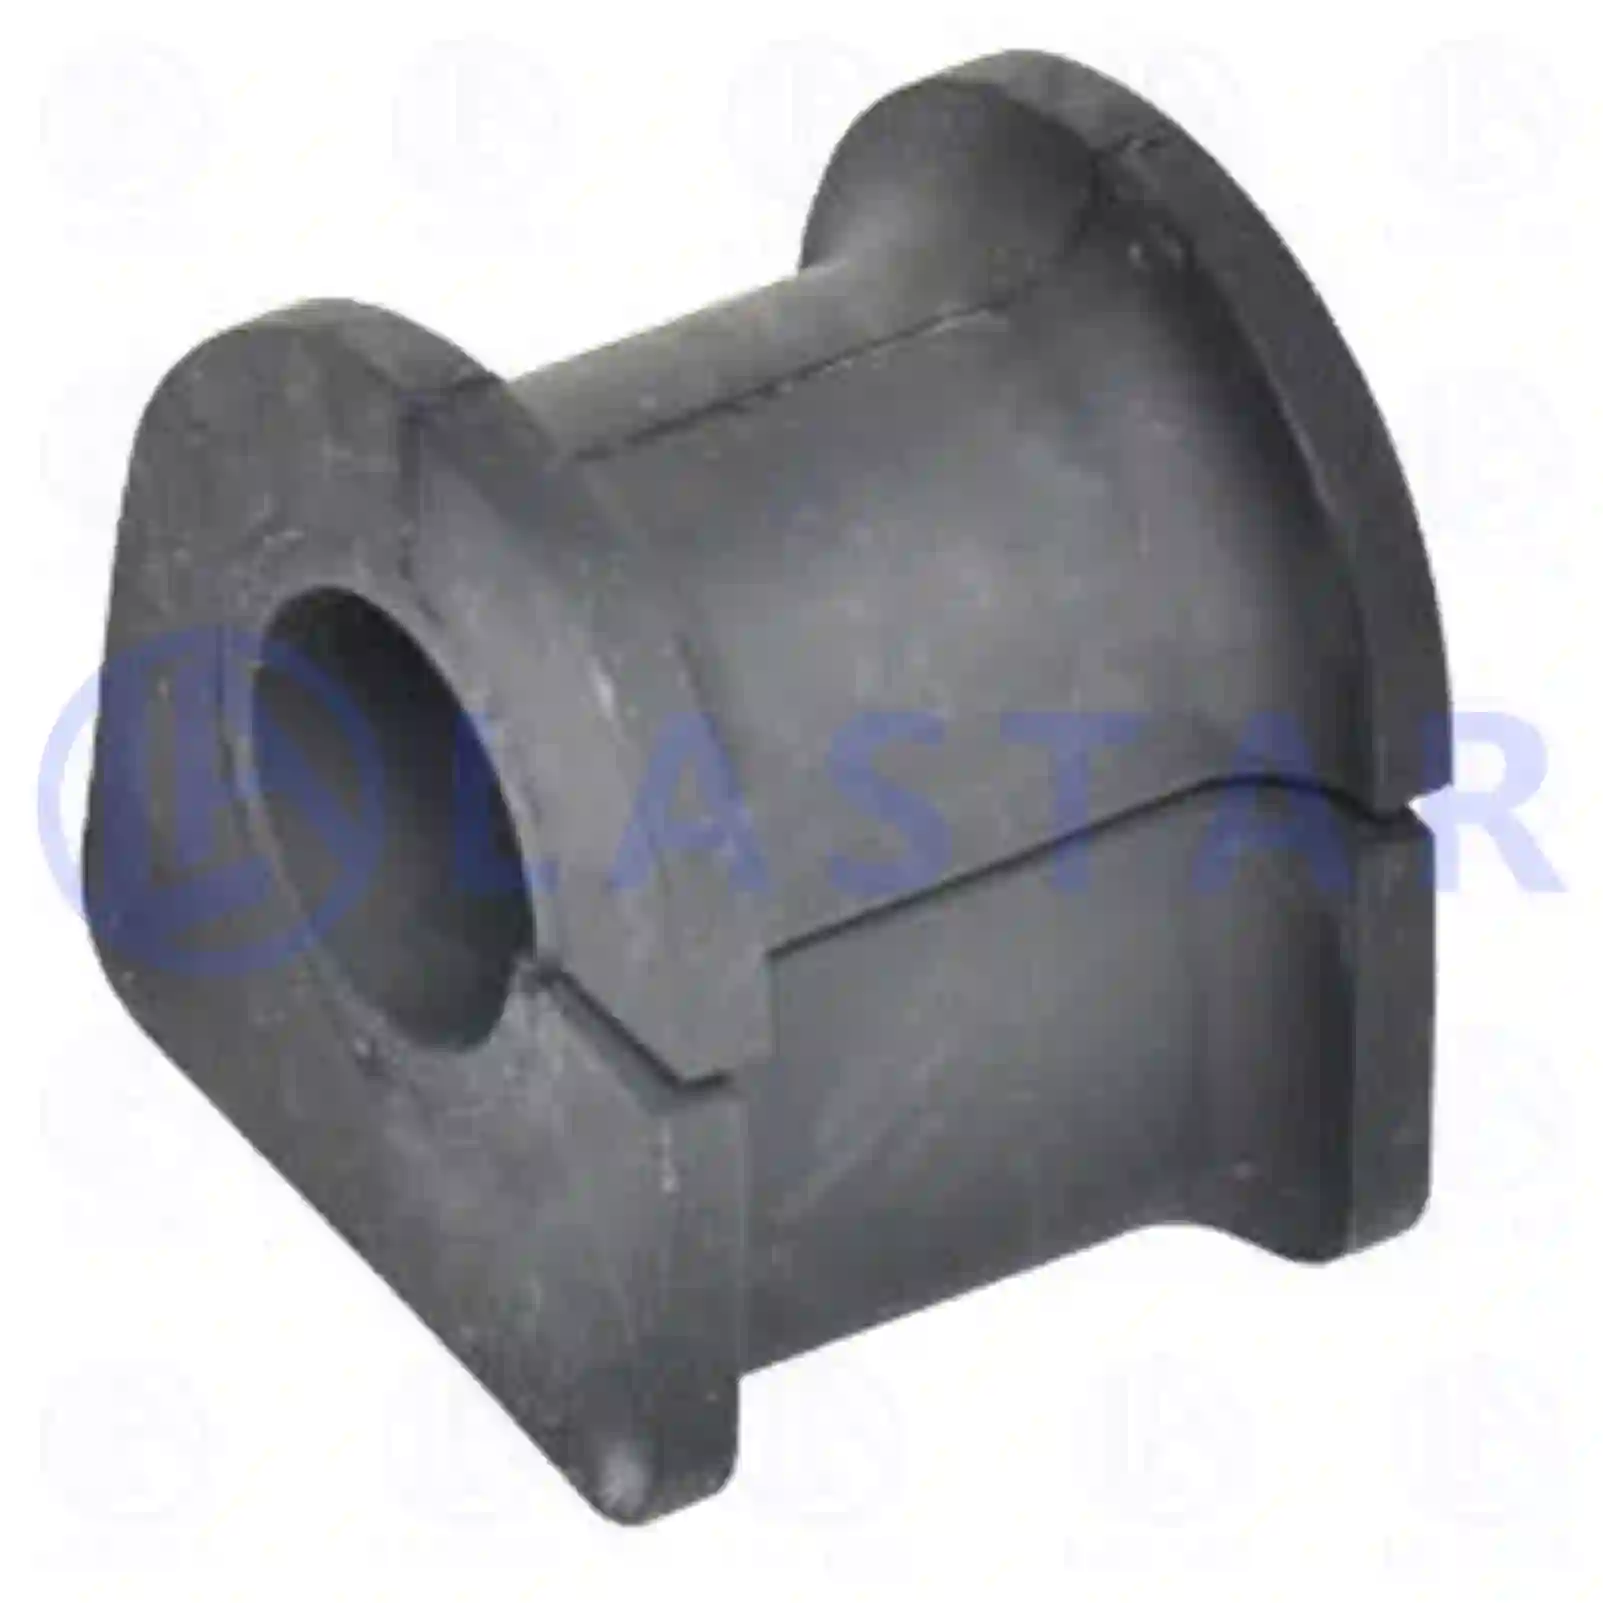 Bushing, stabilizer, 77728300, 9063262381, , , , , , ||  77728300 Lastar Spare Part | Truck Spare Parts, Auotomotive Spare Parts Bushing, stabilizer, 77728300, 9063262381, , , , , , ||  77728300 Lastar Spare Part | Truck Spare Parts, Auotomotive Spare Parts